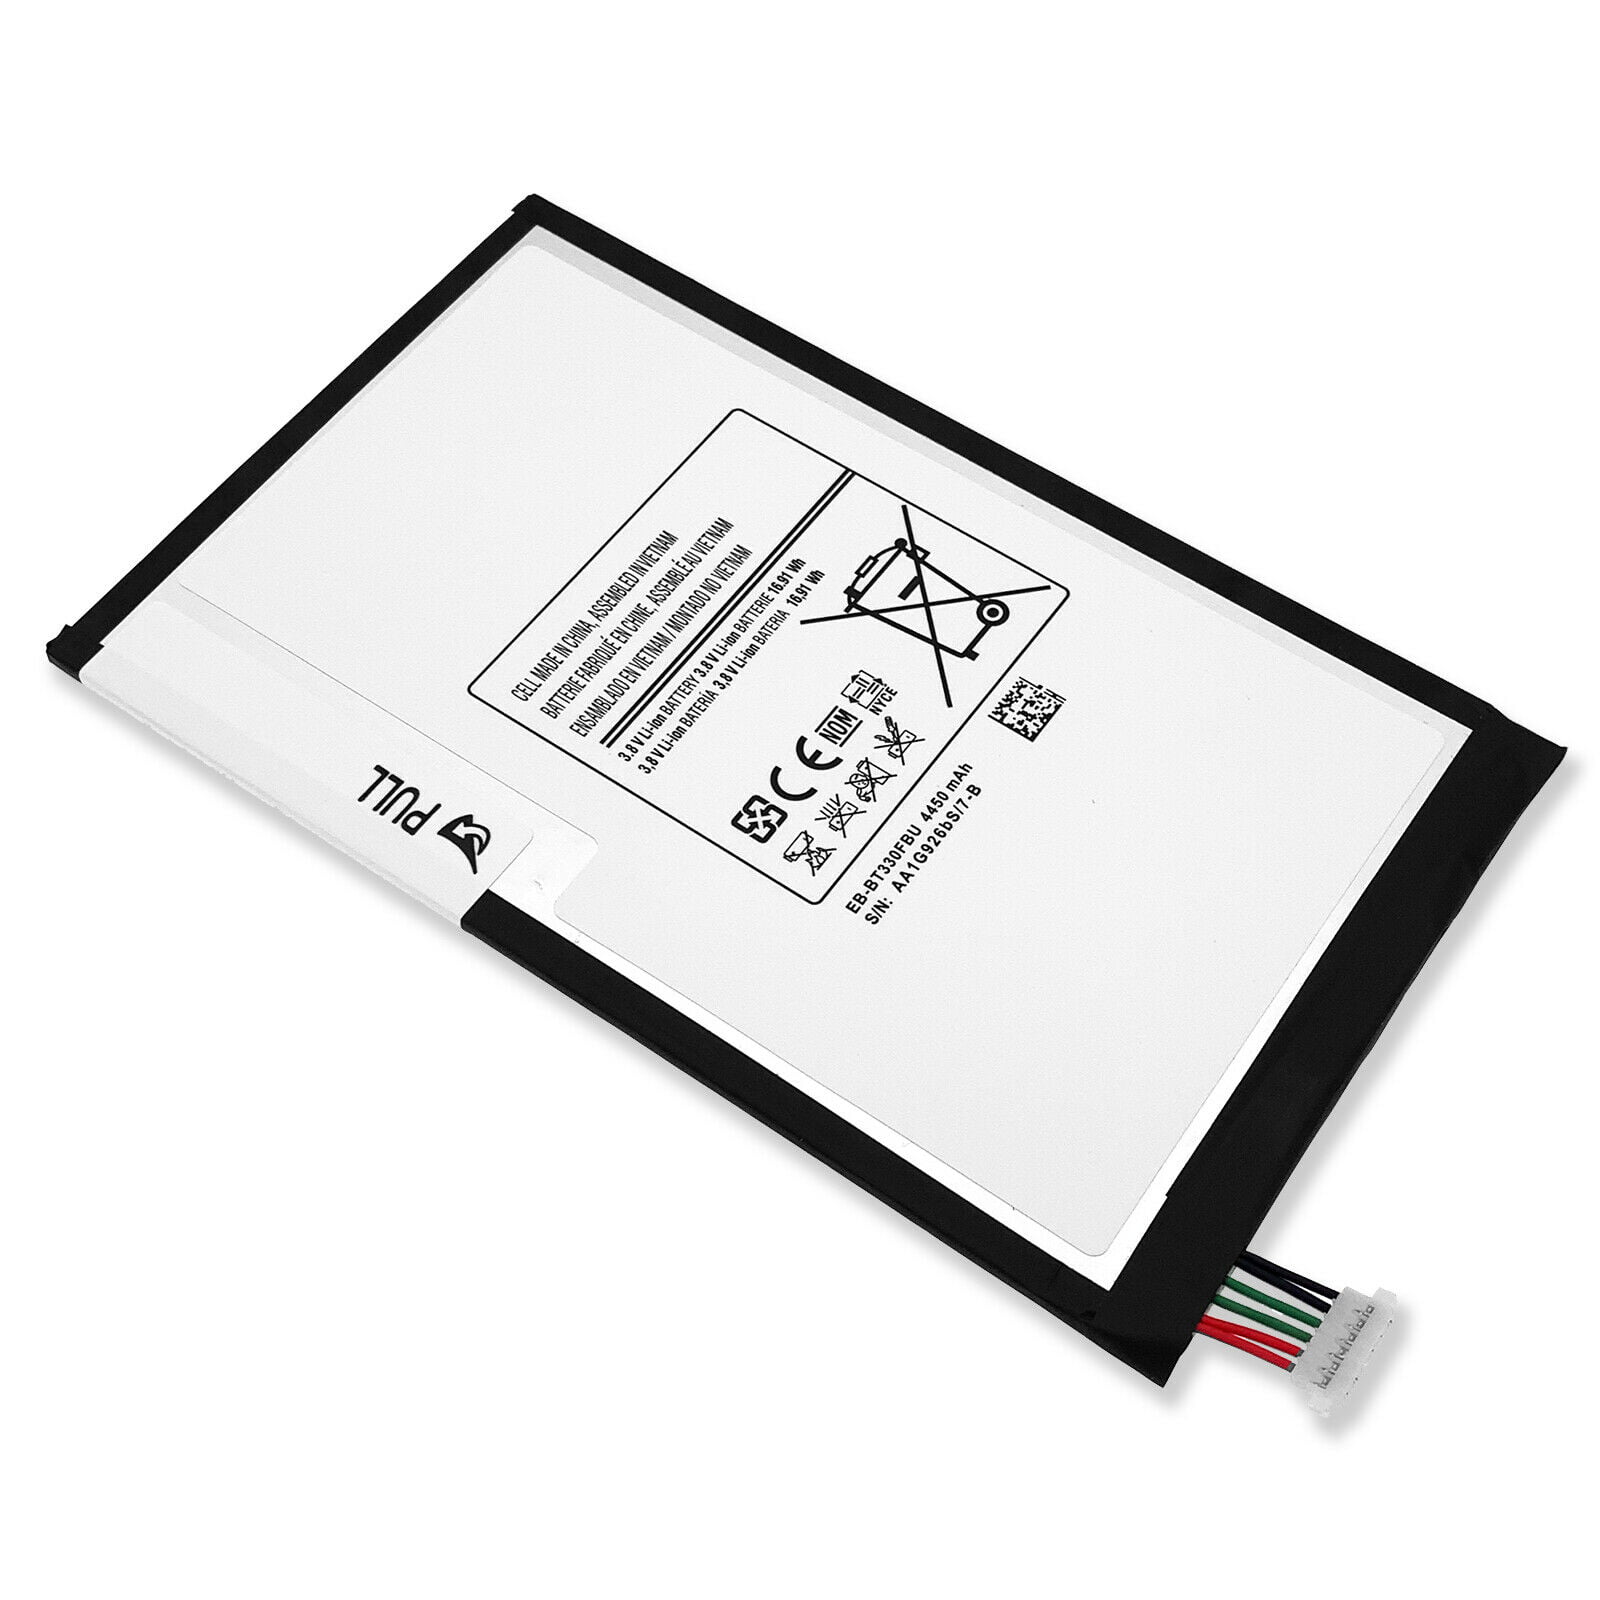 NuFix Premium Battery Replacement Kit for Samsung Tab 3 8.0 T4450E 4450mAh with Repair Tools and Adhesive SM-T310 T310